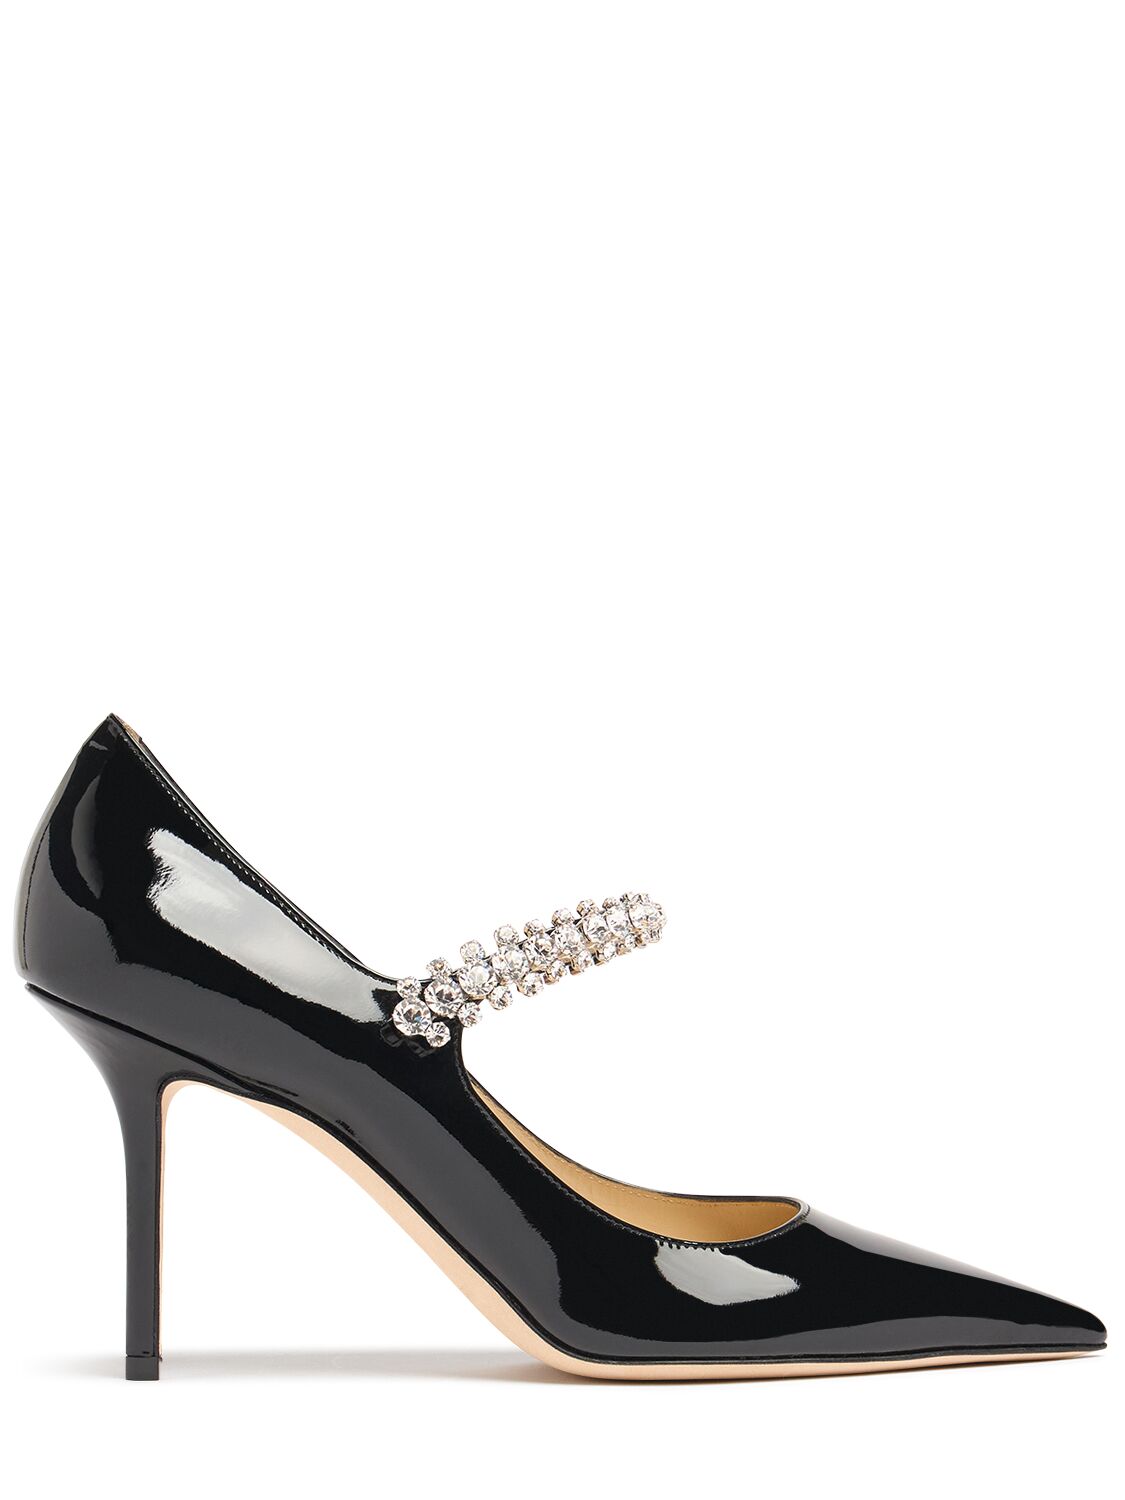 Jimmy Choo 85mm Bling Patent Leather Pumps In Black